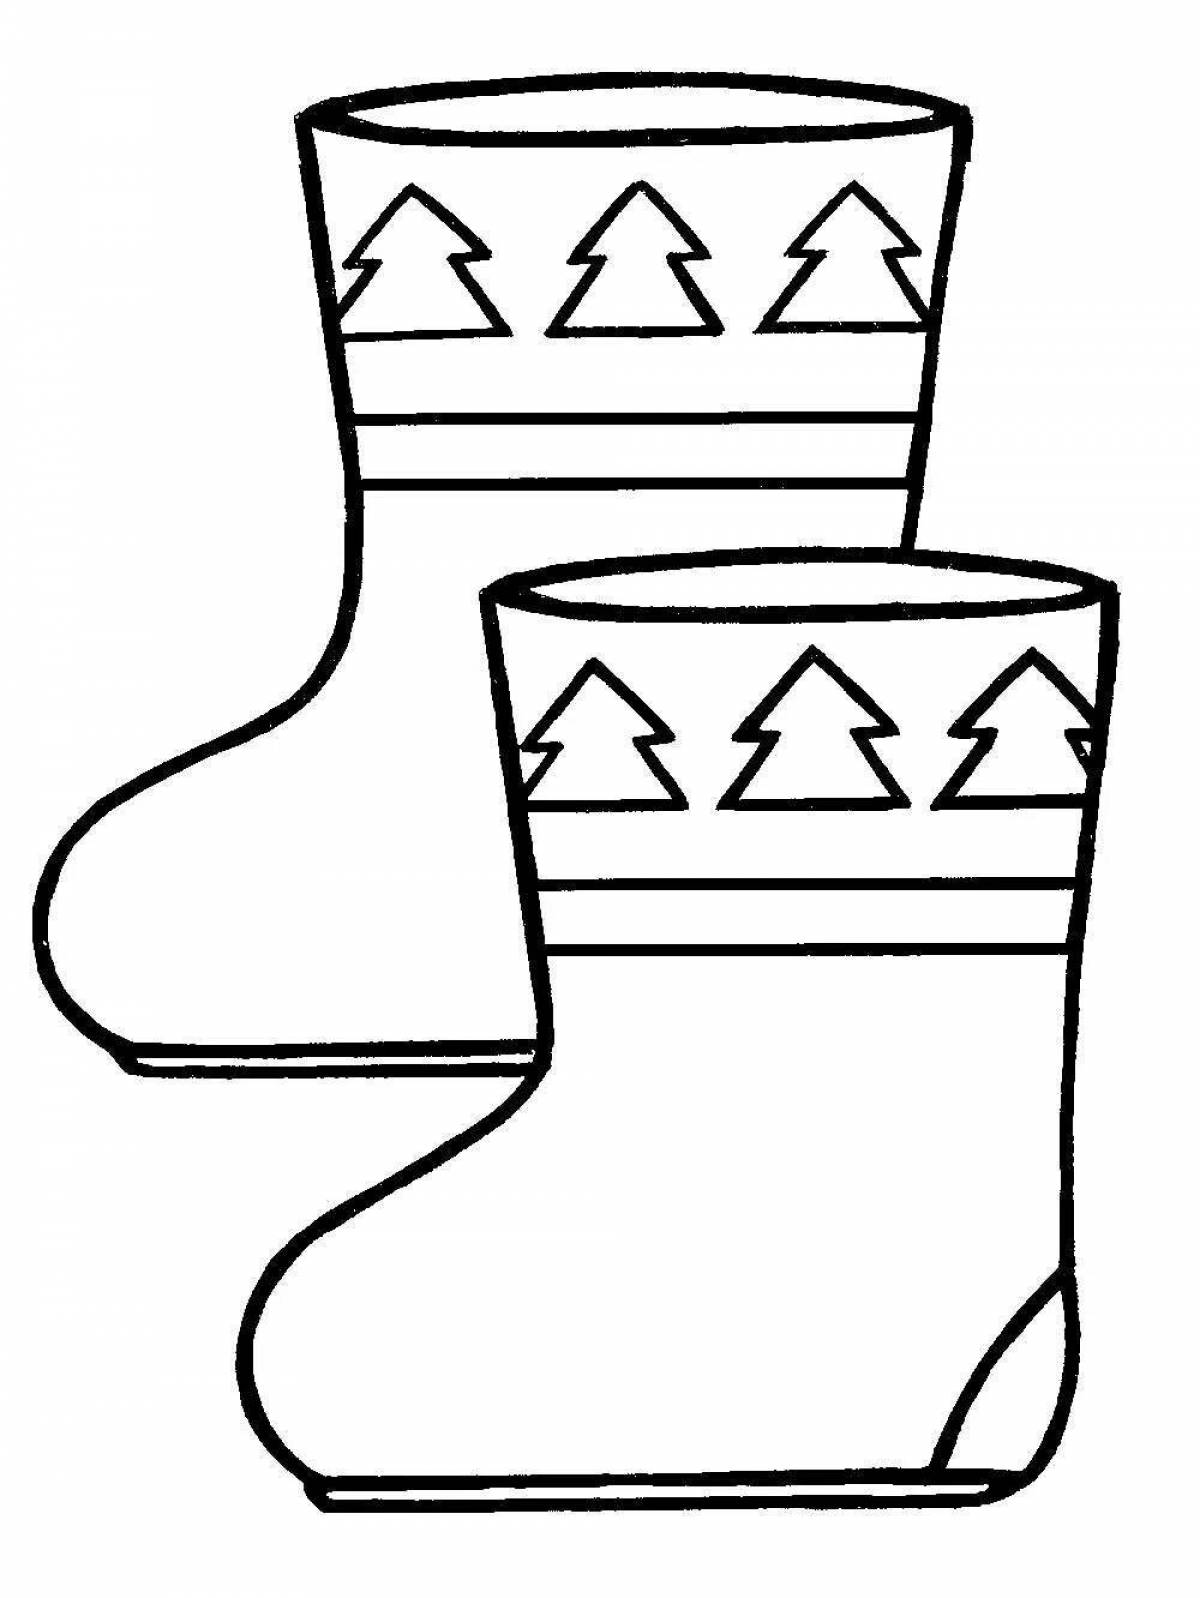 Coloring page inviting felt boots